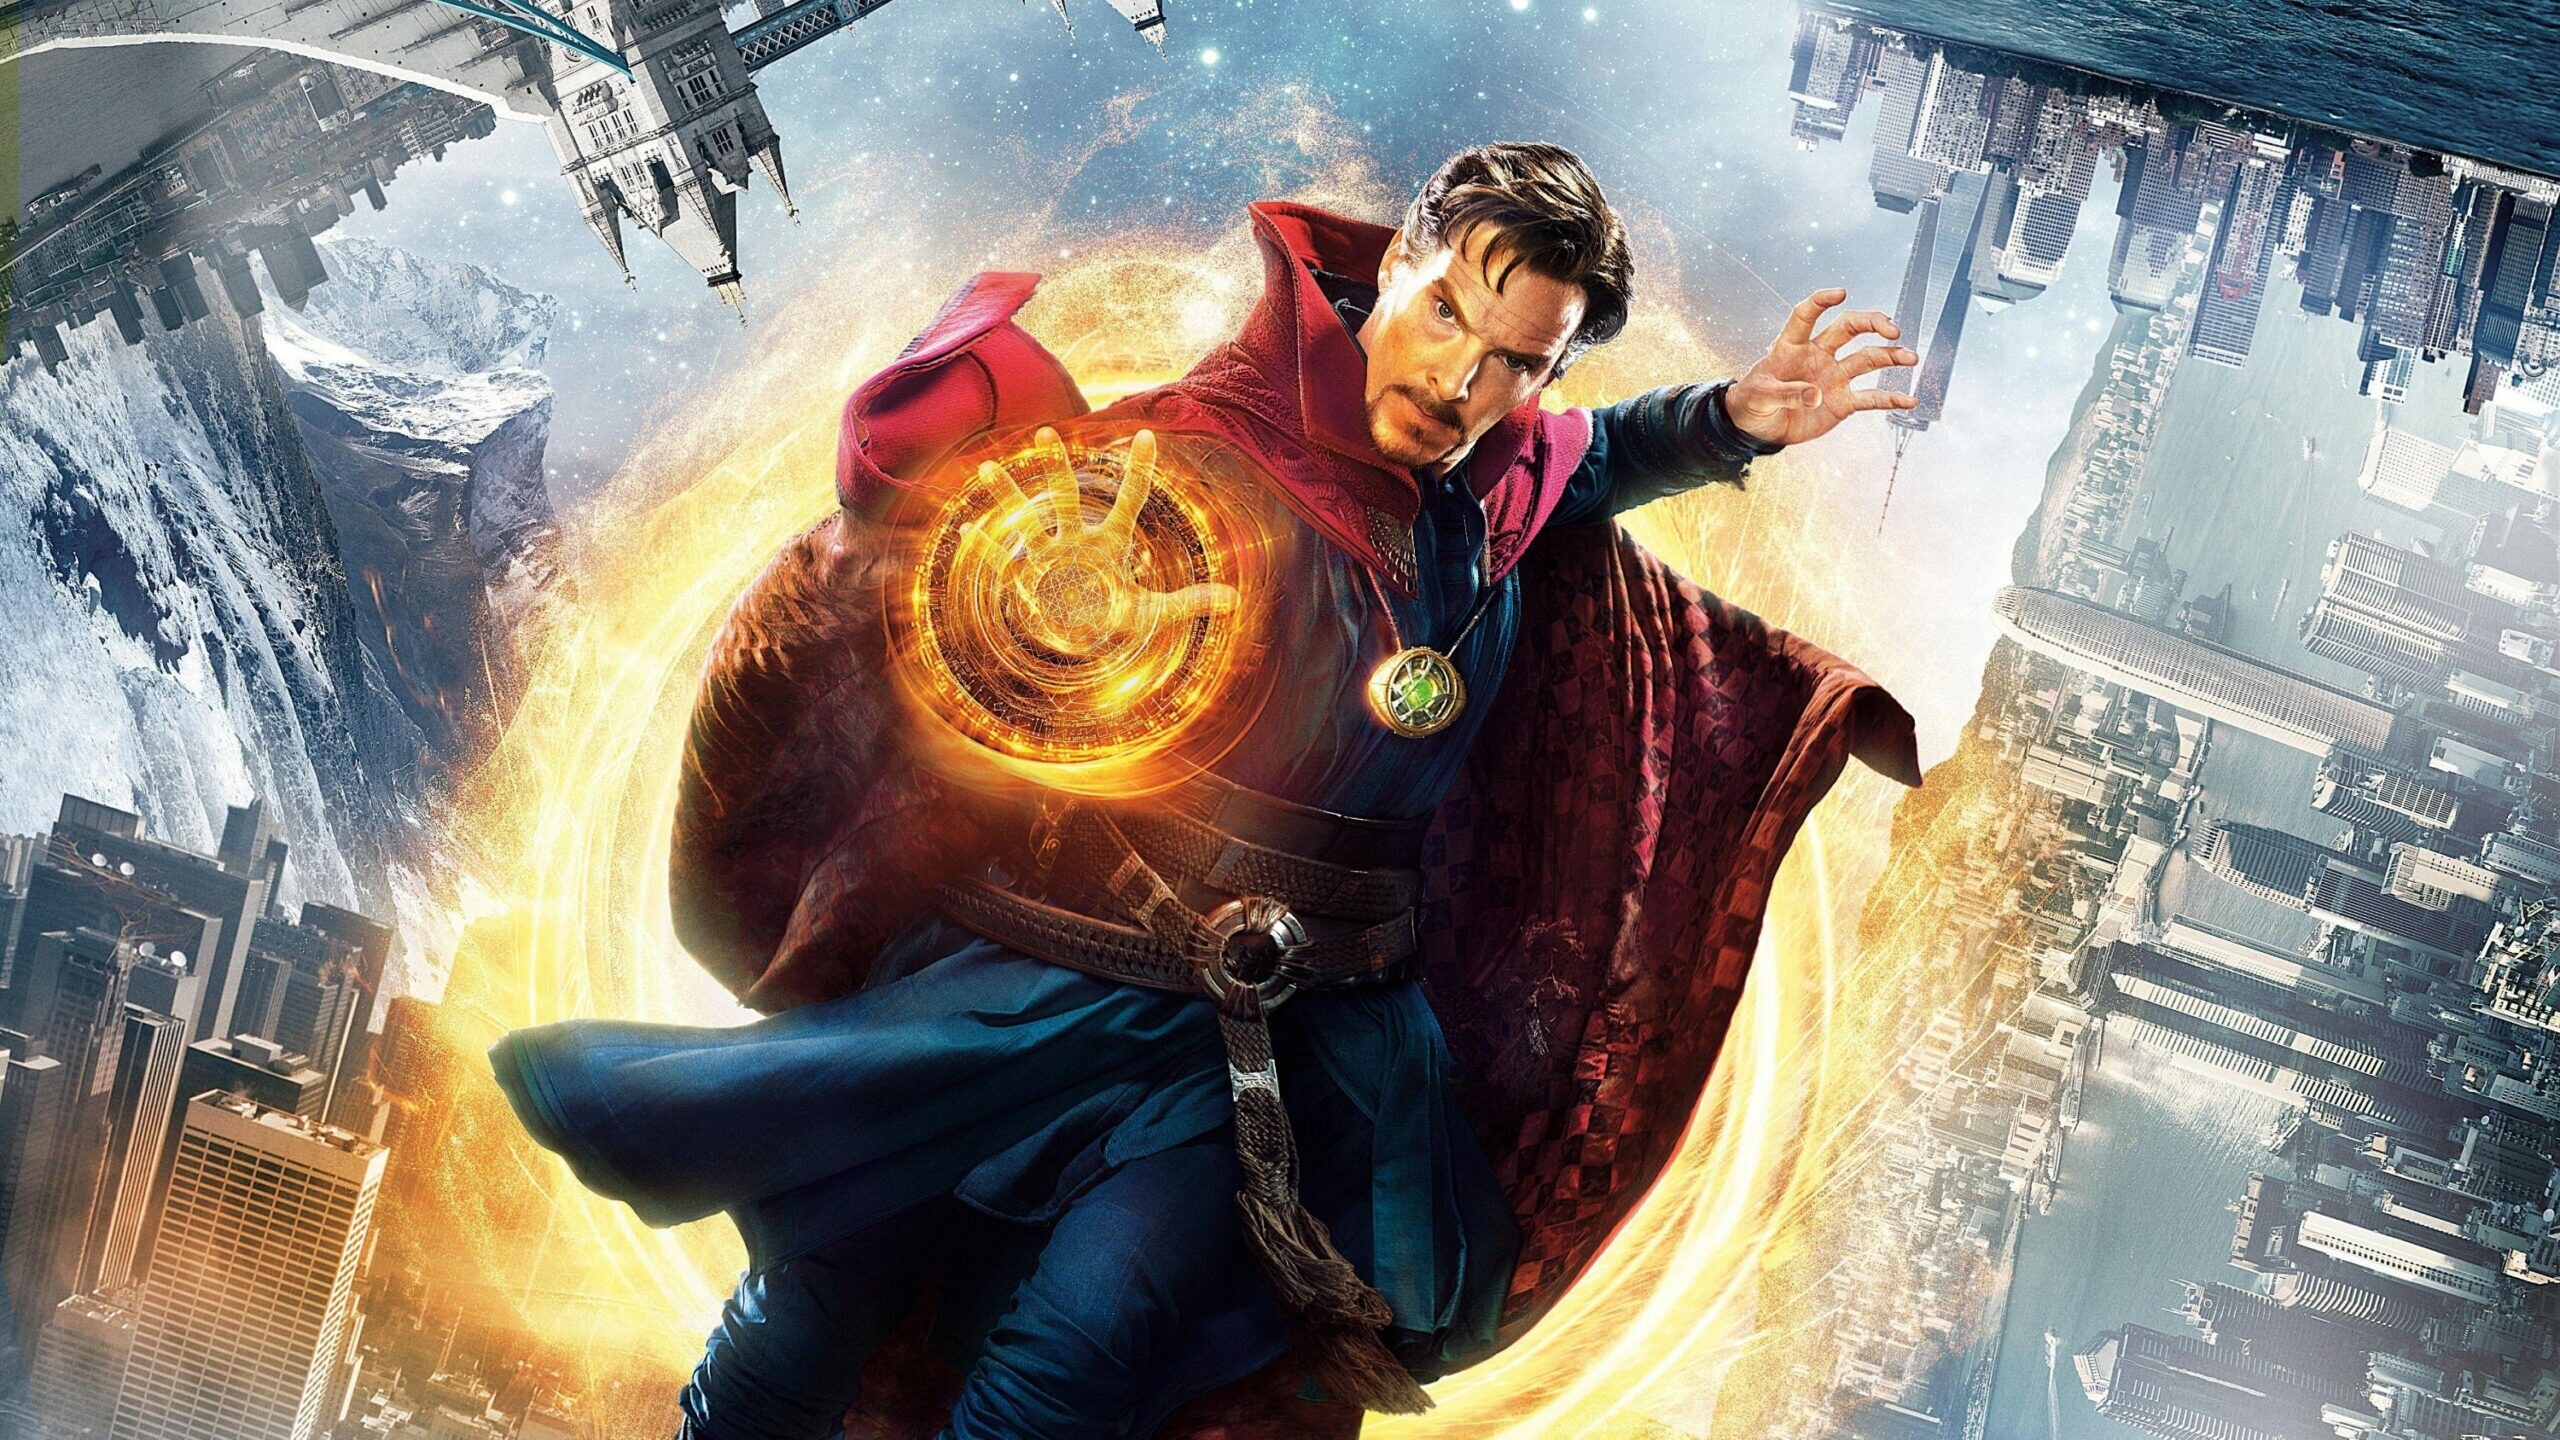 Doctor Strange in the Multiverse of Madness: Benedict Cumberbatch as Stephen Strange, The protagonist. 2560x1440 HD Wallpaper.